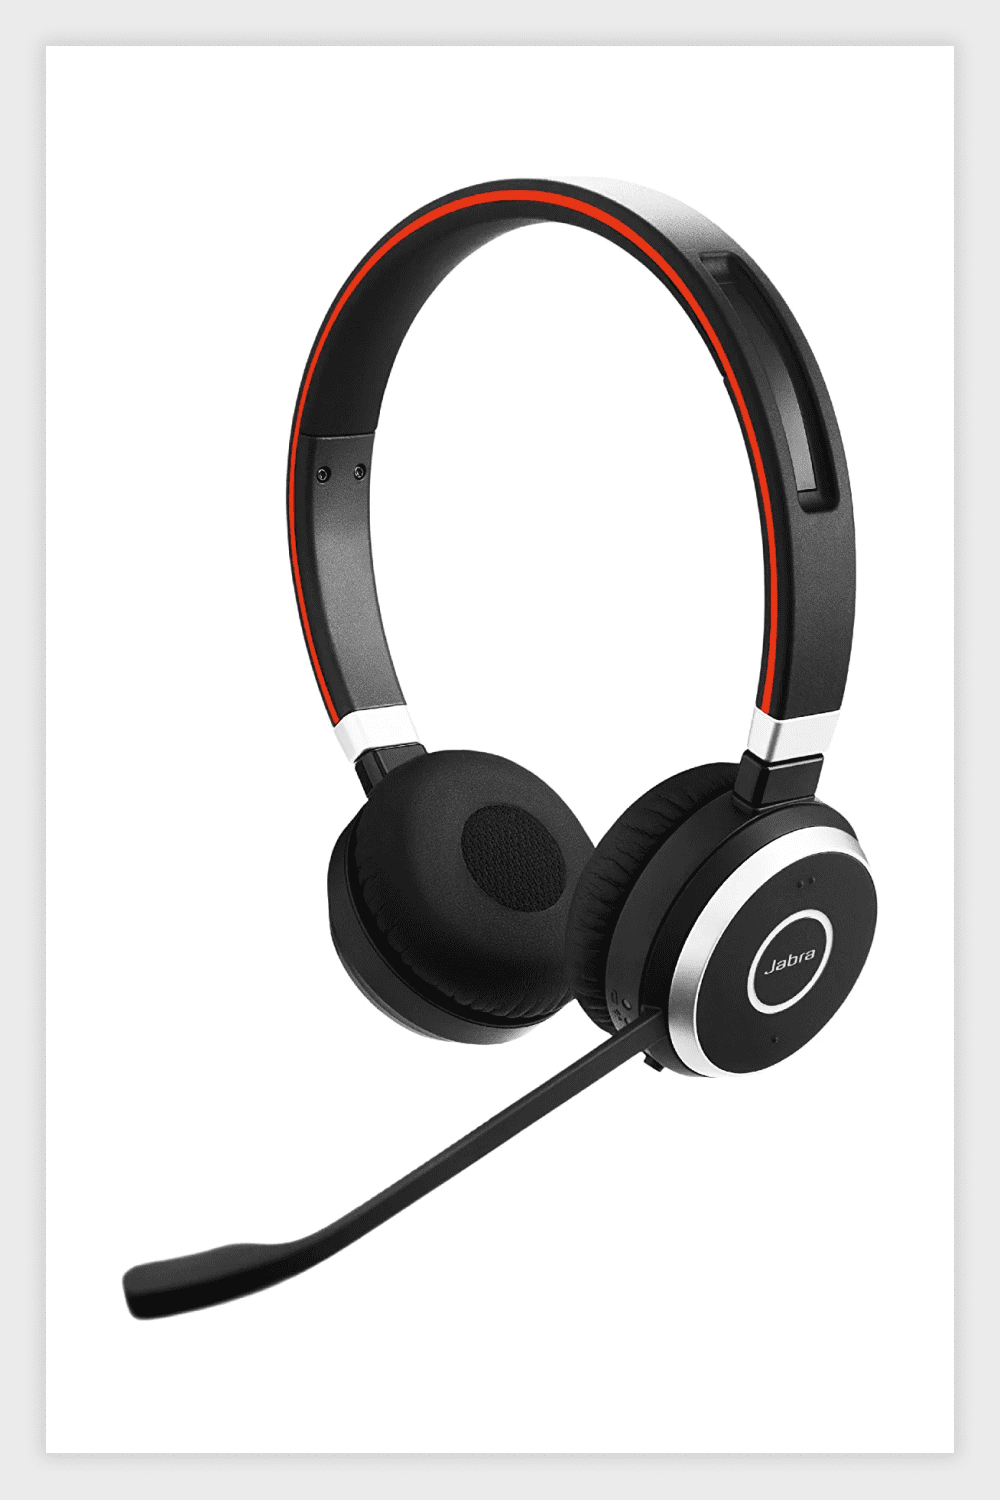 Photo of the Jabra Evolve 65 UC Wireless Headset ib black and red color.